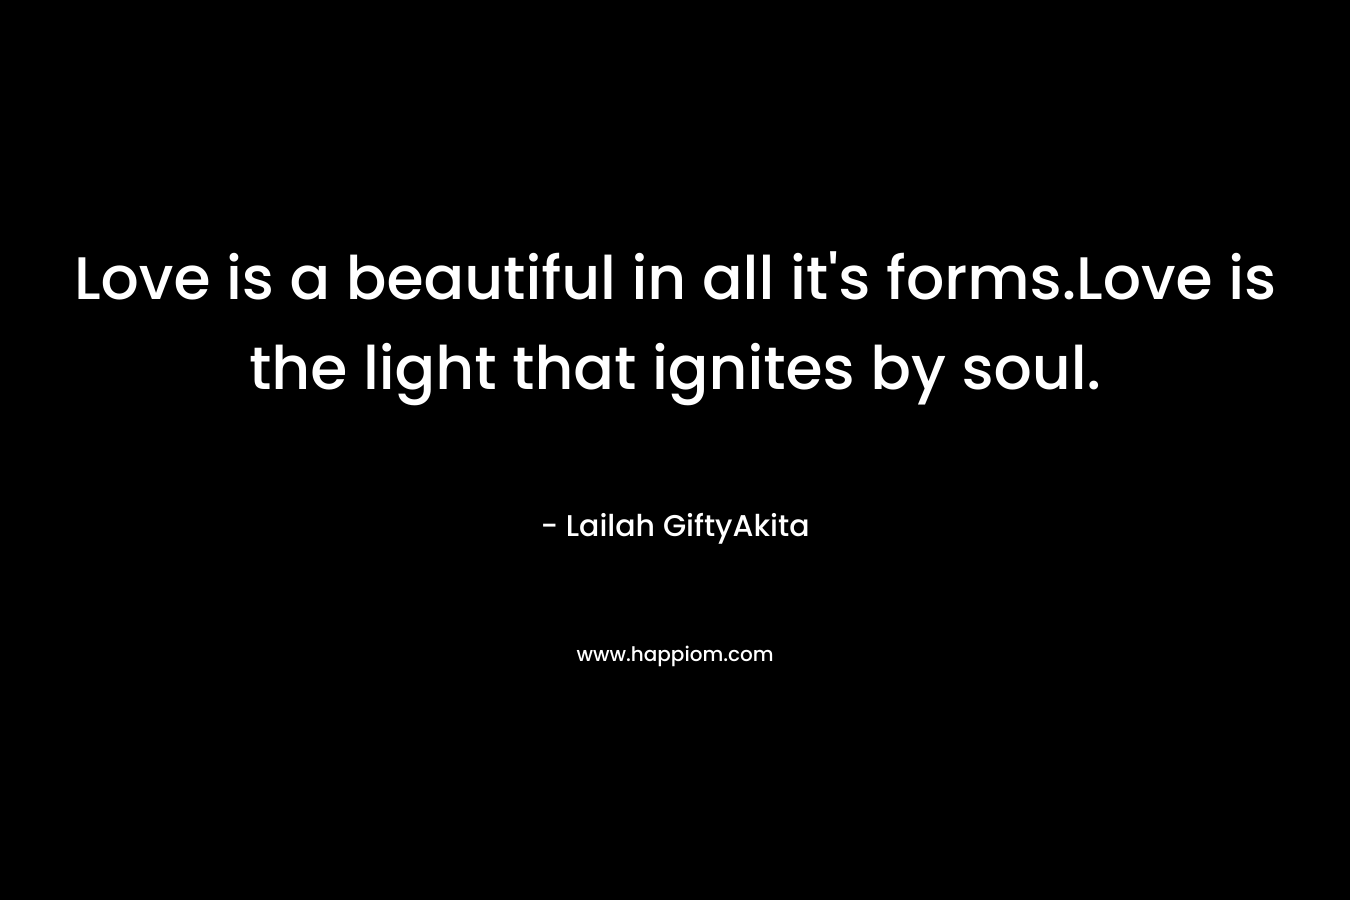 Love is a beautiful in all it’s forms.Love is the light that ignites by soul. – Lailah GiftyAkita